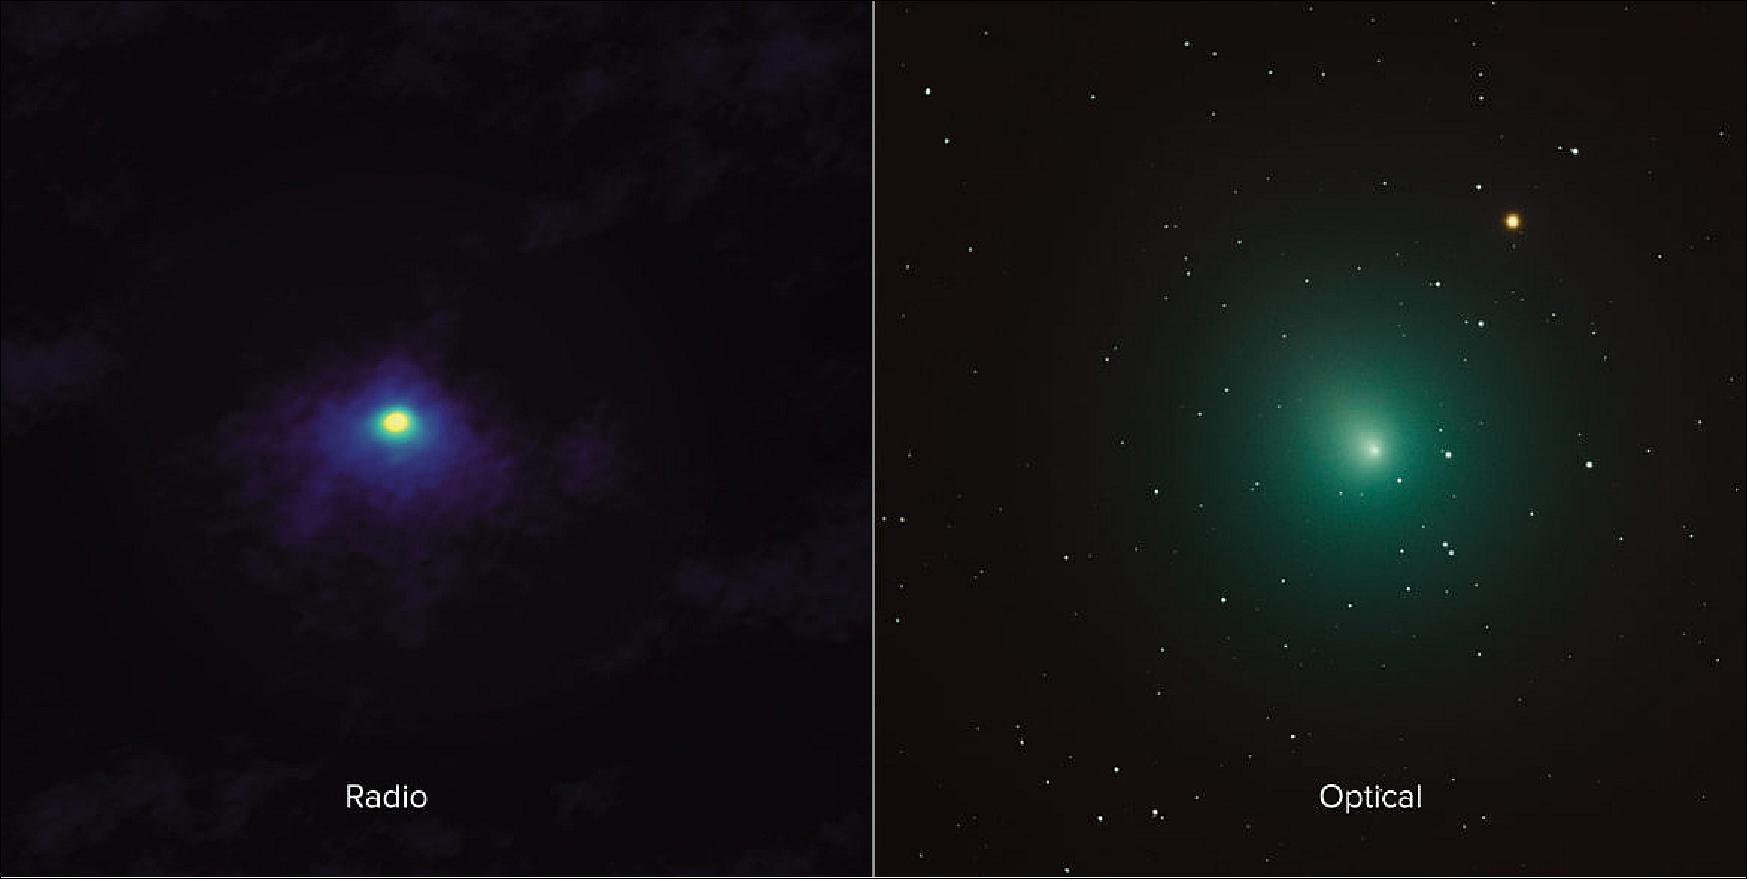 Figure 1: The side-by-side comparison shows an ALMA image of comet 46P/Wirtanen (left) and an optical image (right). The ALMA image has approximately 1000 times the resolution of the optical image and zooms in on the inner portion of the comet's diffuse coma (image credit: ALMA (ESO/NAOJ/NRAO), M. Cordiner, NASA/CUA; Derek Demeter, Emil Buehler Planetarium)